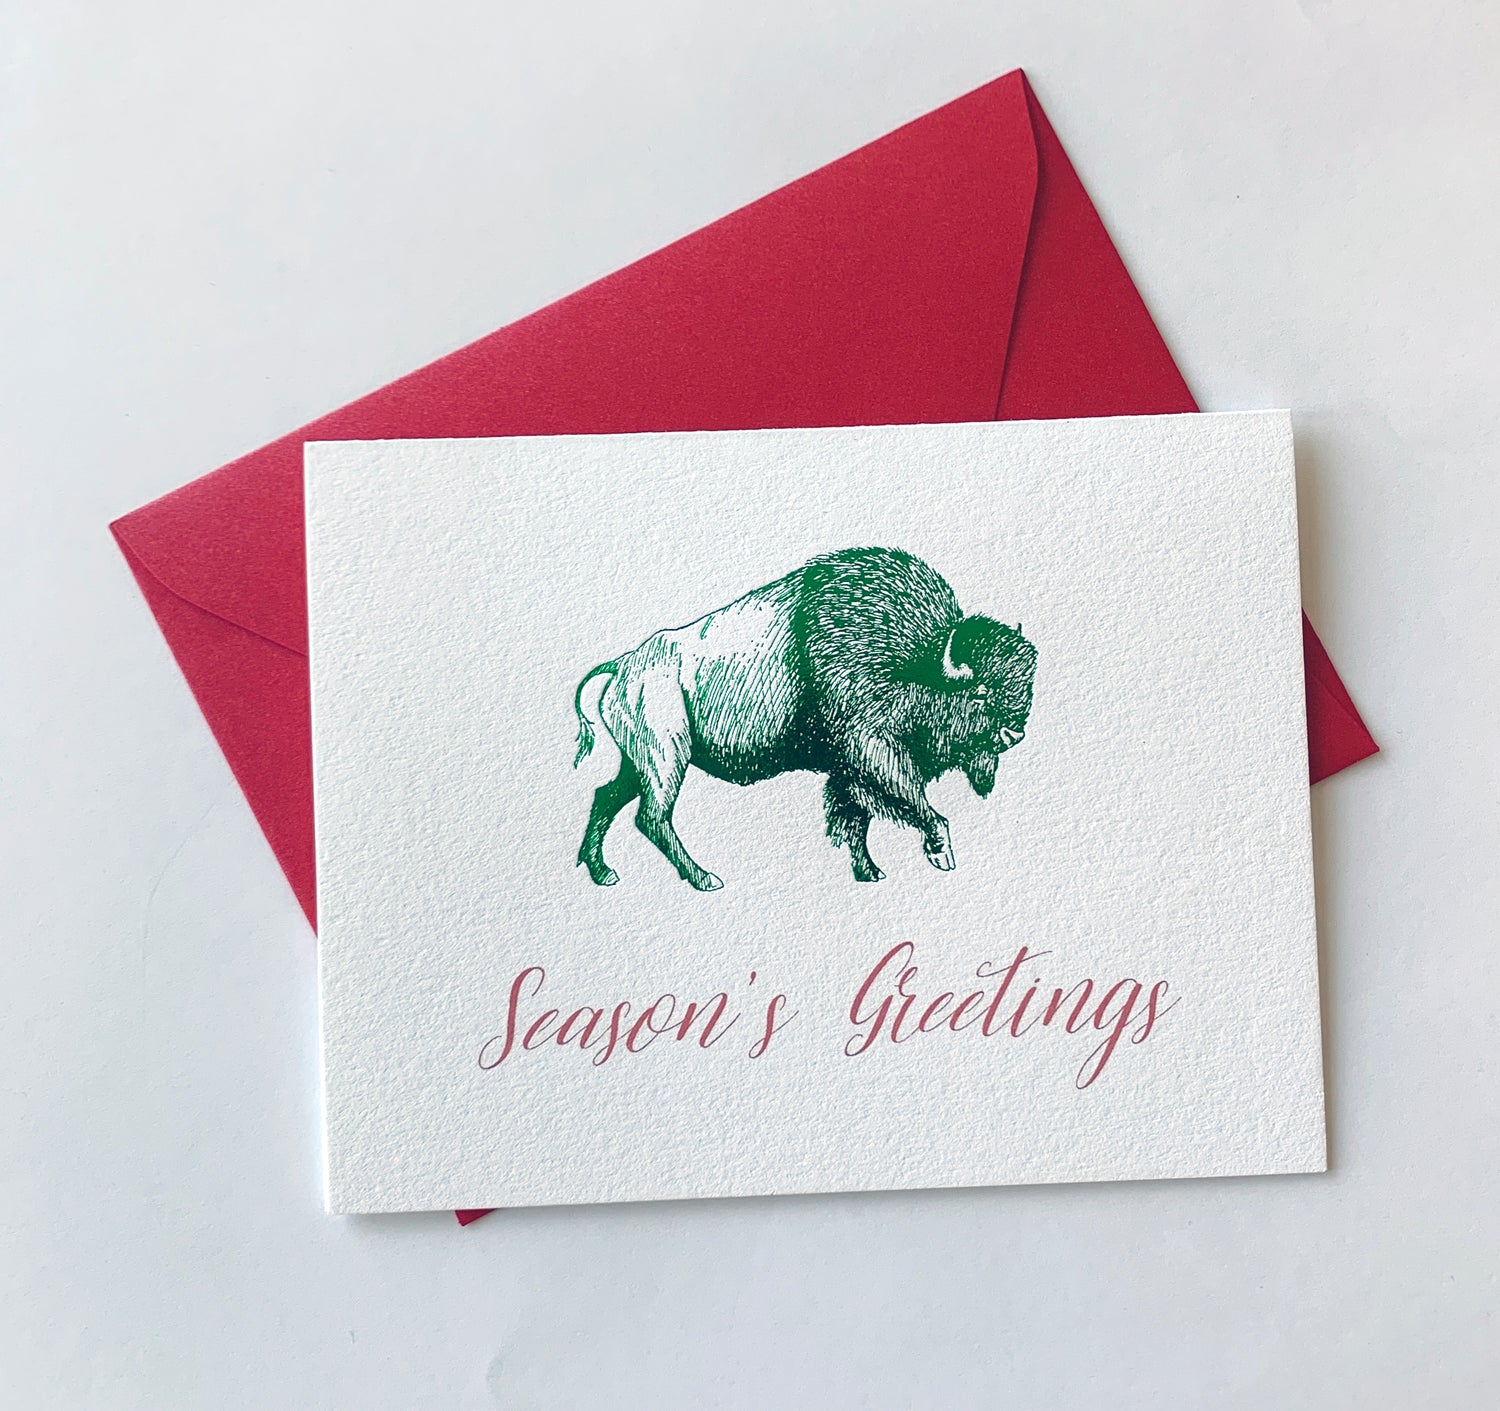 Letterpress holiday card with green foil buffalo that says "Season's greetings" by Rust Belt Love